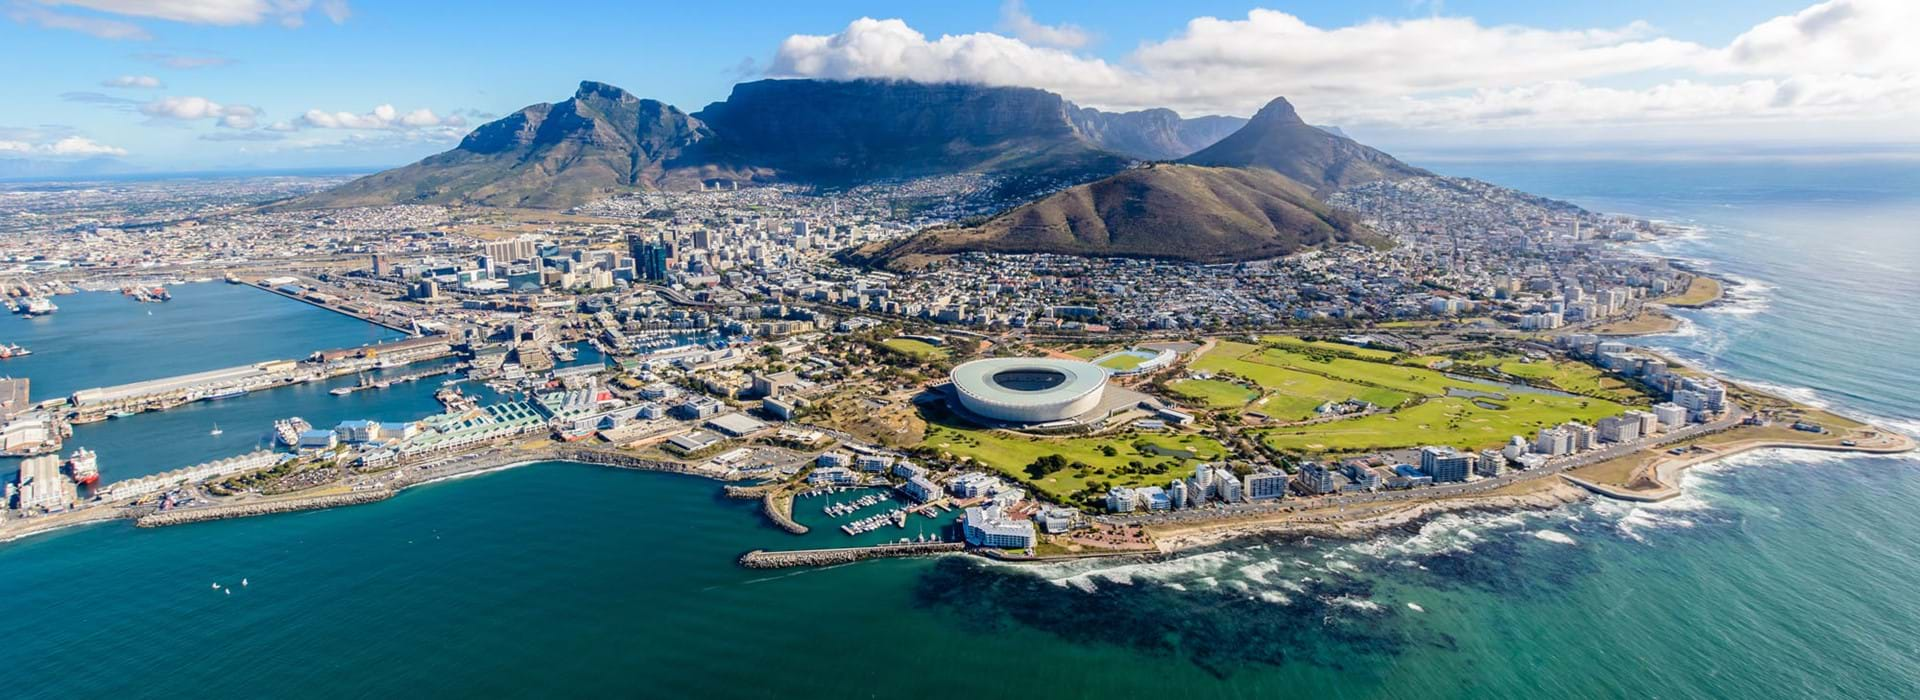 Classic South Africa 2021 | Radio Times Travel